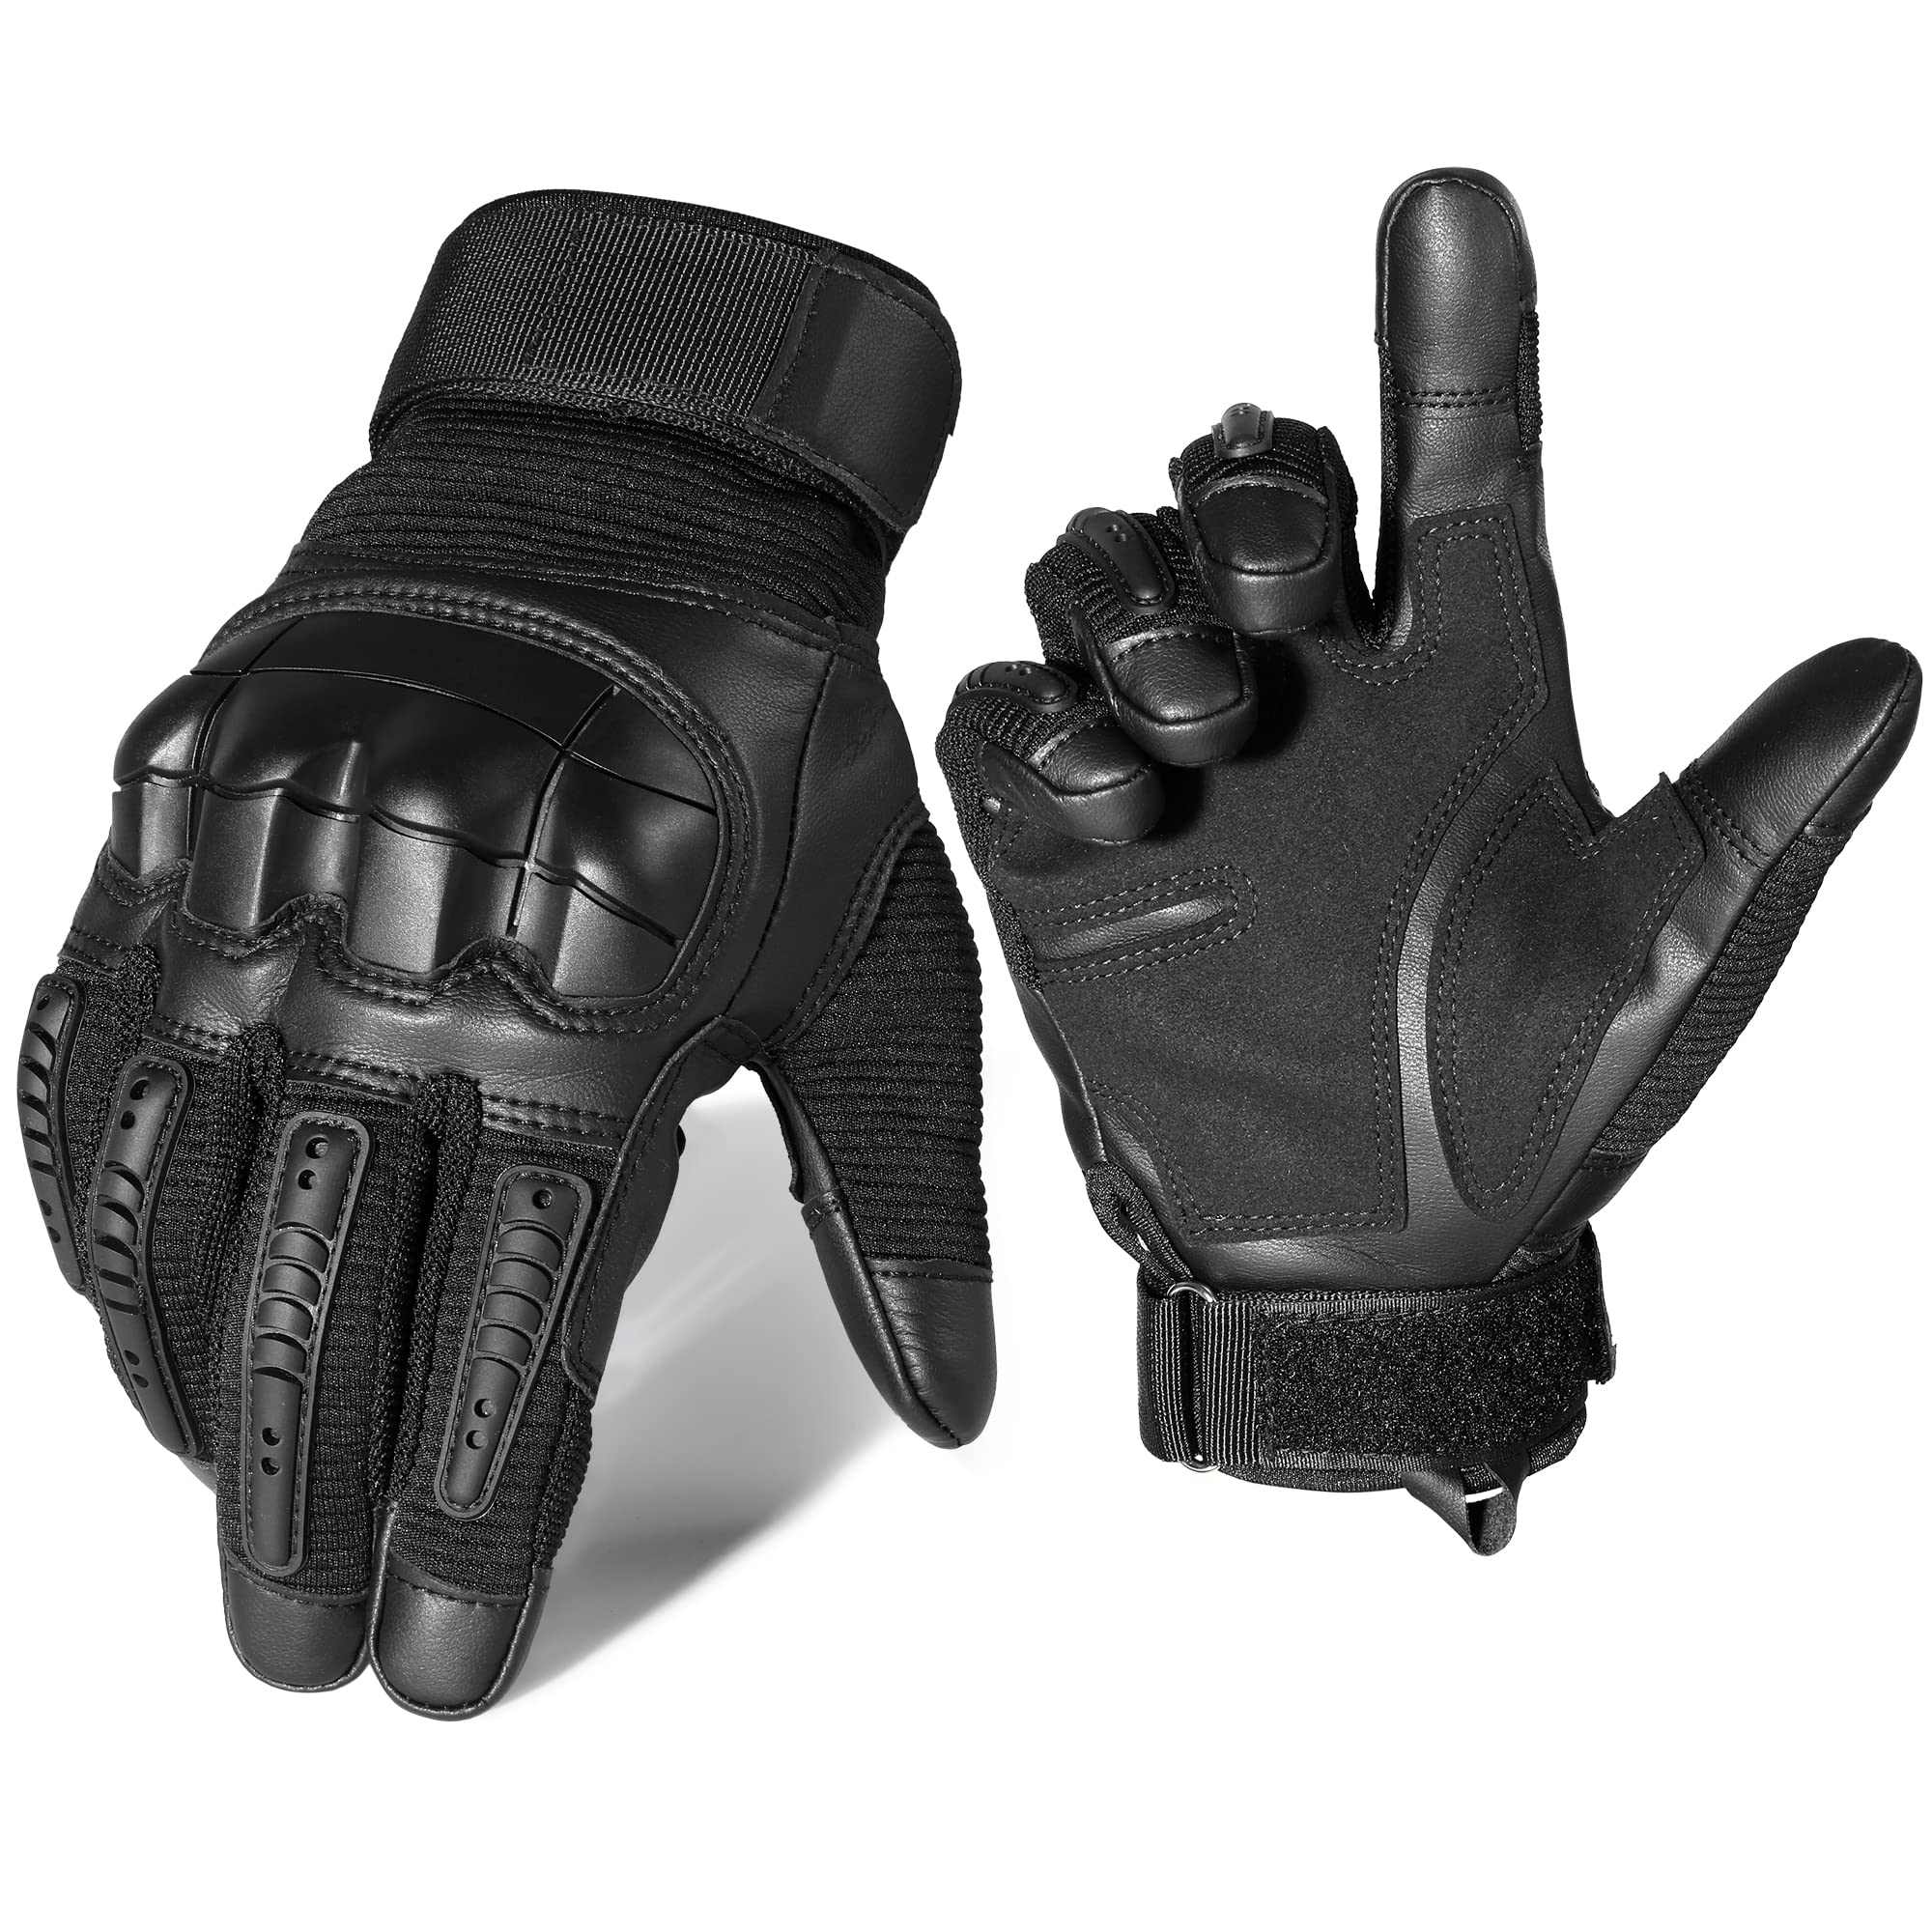  Outdoor Sports Motorcycle Cycling Gloves Airsoft Shooting  Hunting Full Finger Camouflage Touch Screen Tactical Gloves - Black - S :  Todo lo demás